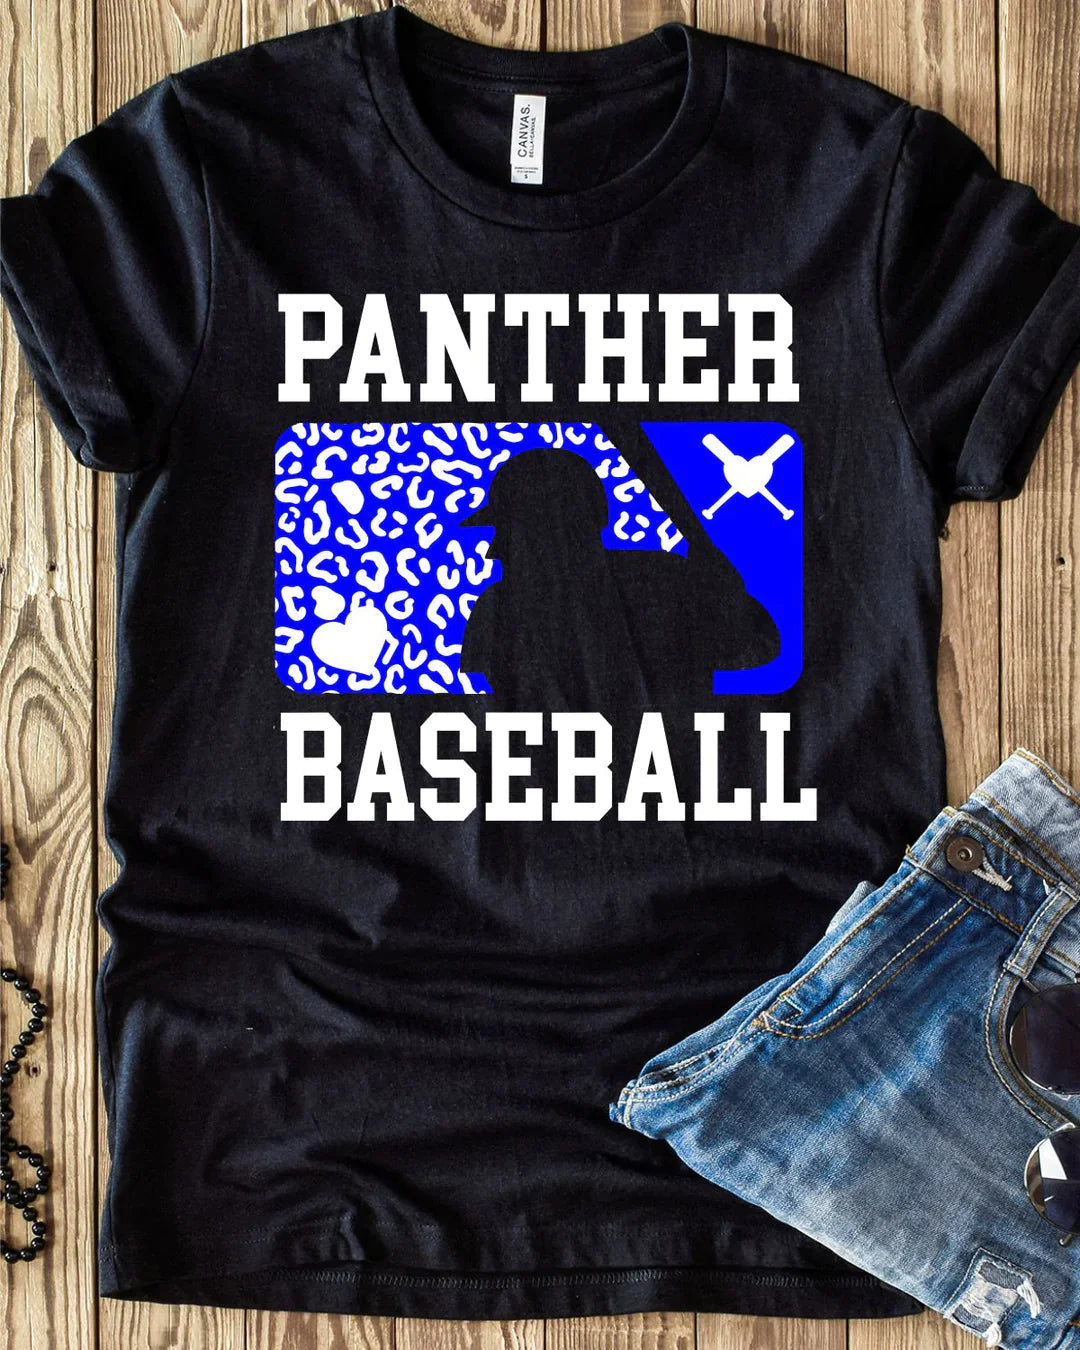 Panthers Baseball - AnnRose Boutique